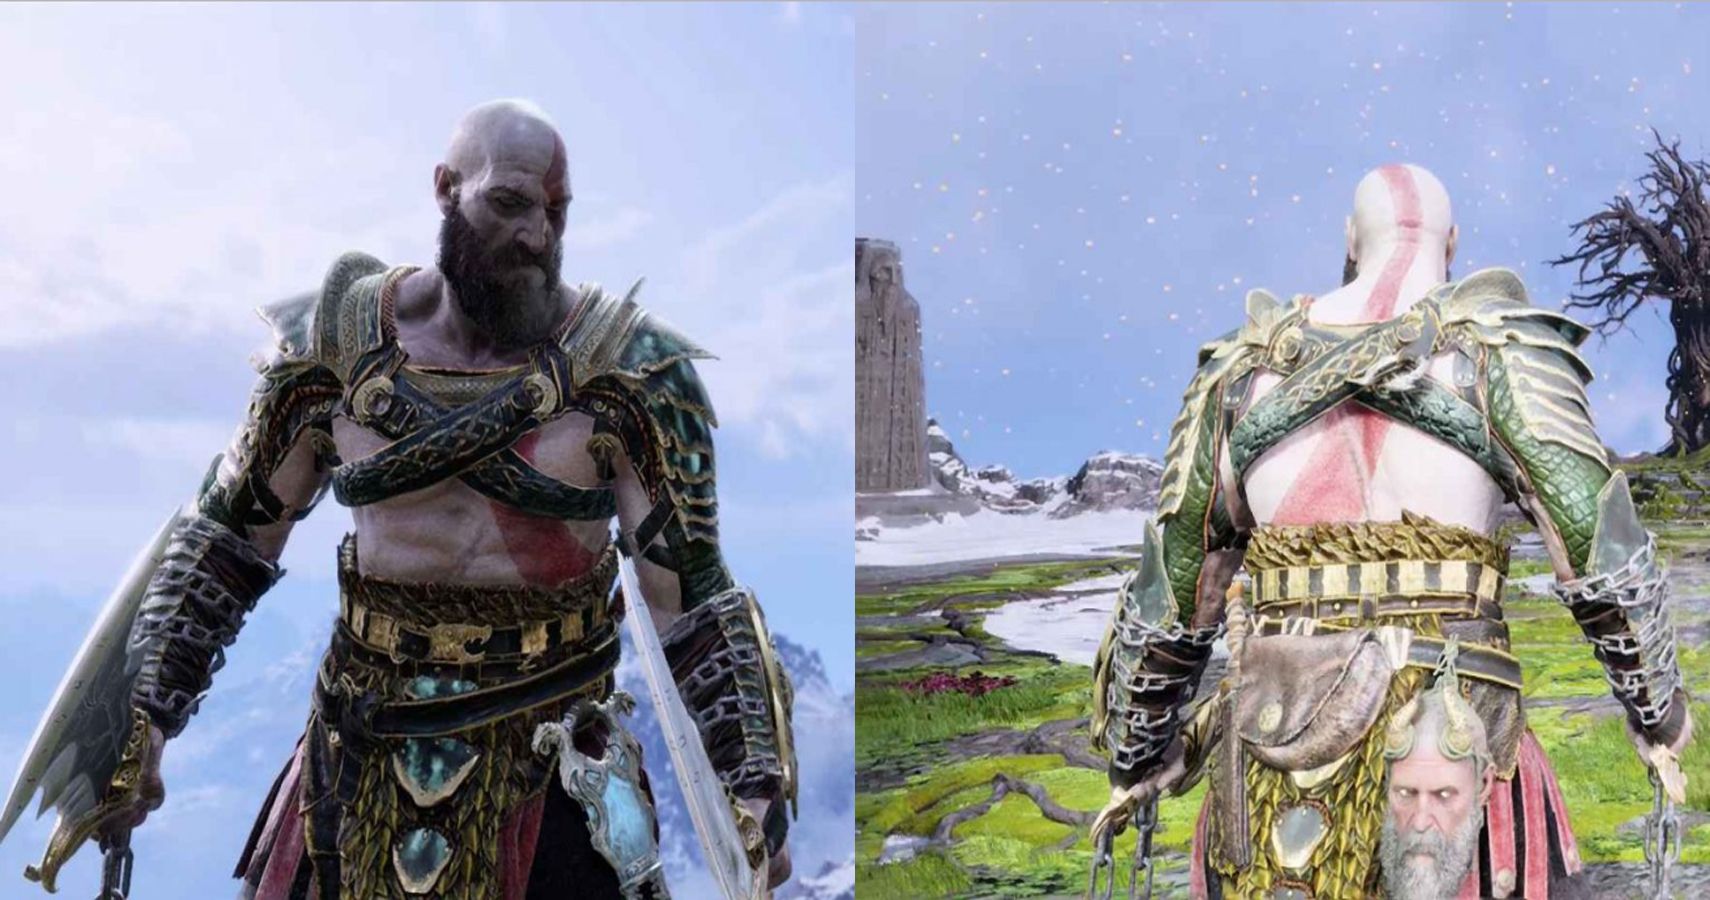 The Ivaldi's Cursed Mist armor from God of War